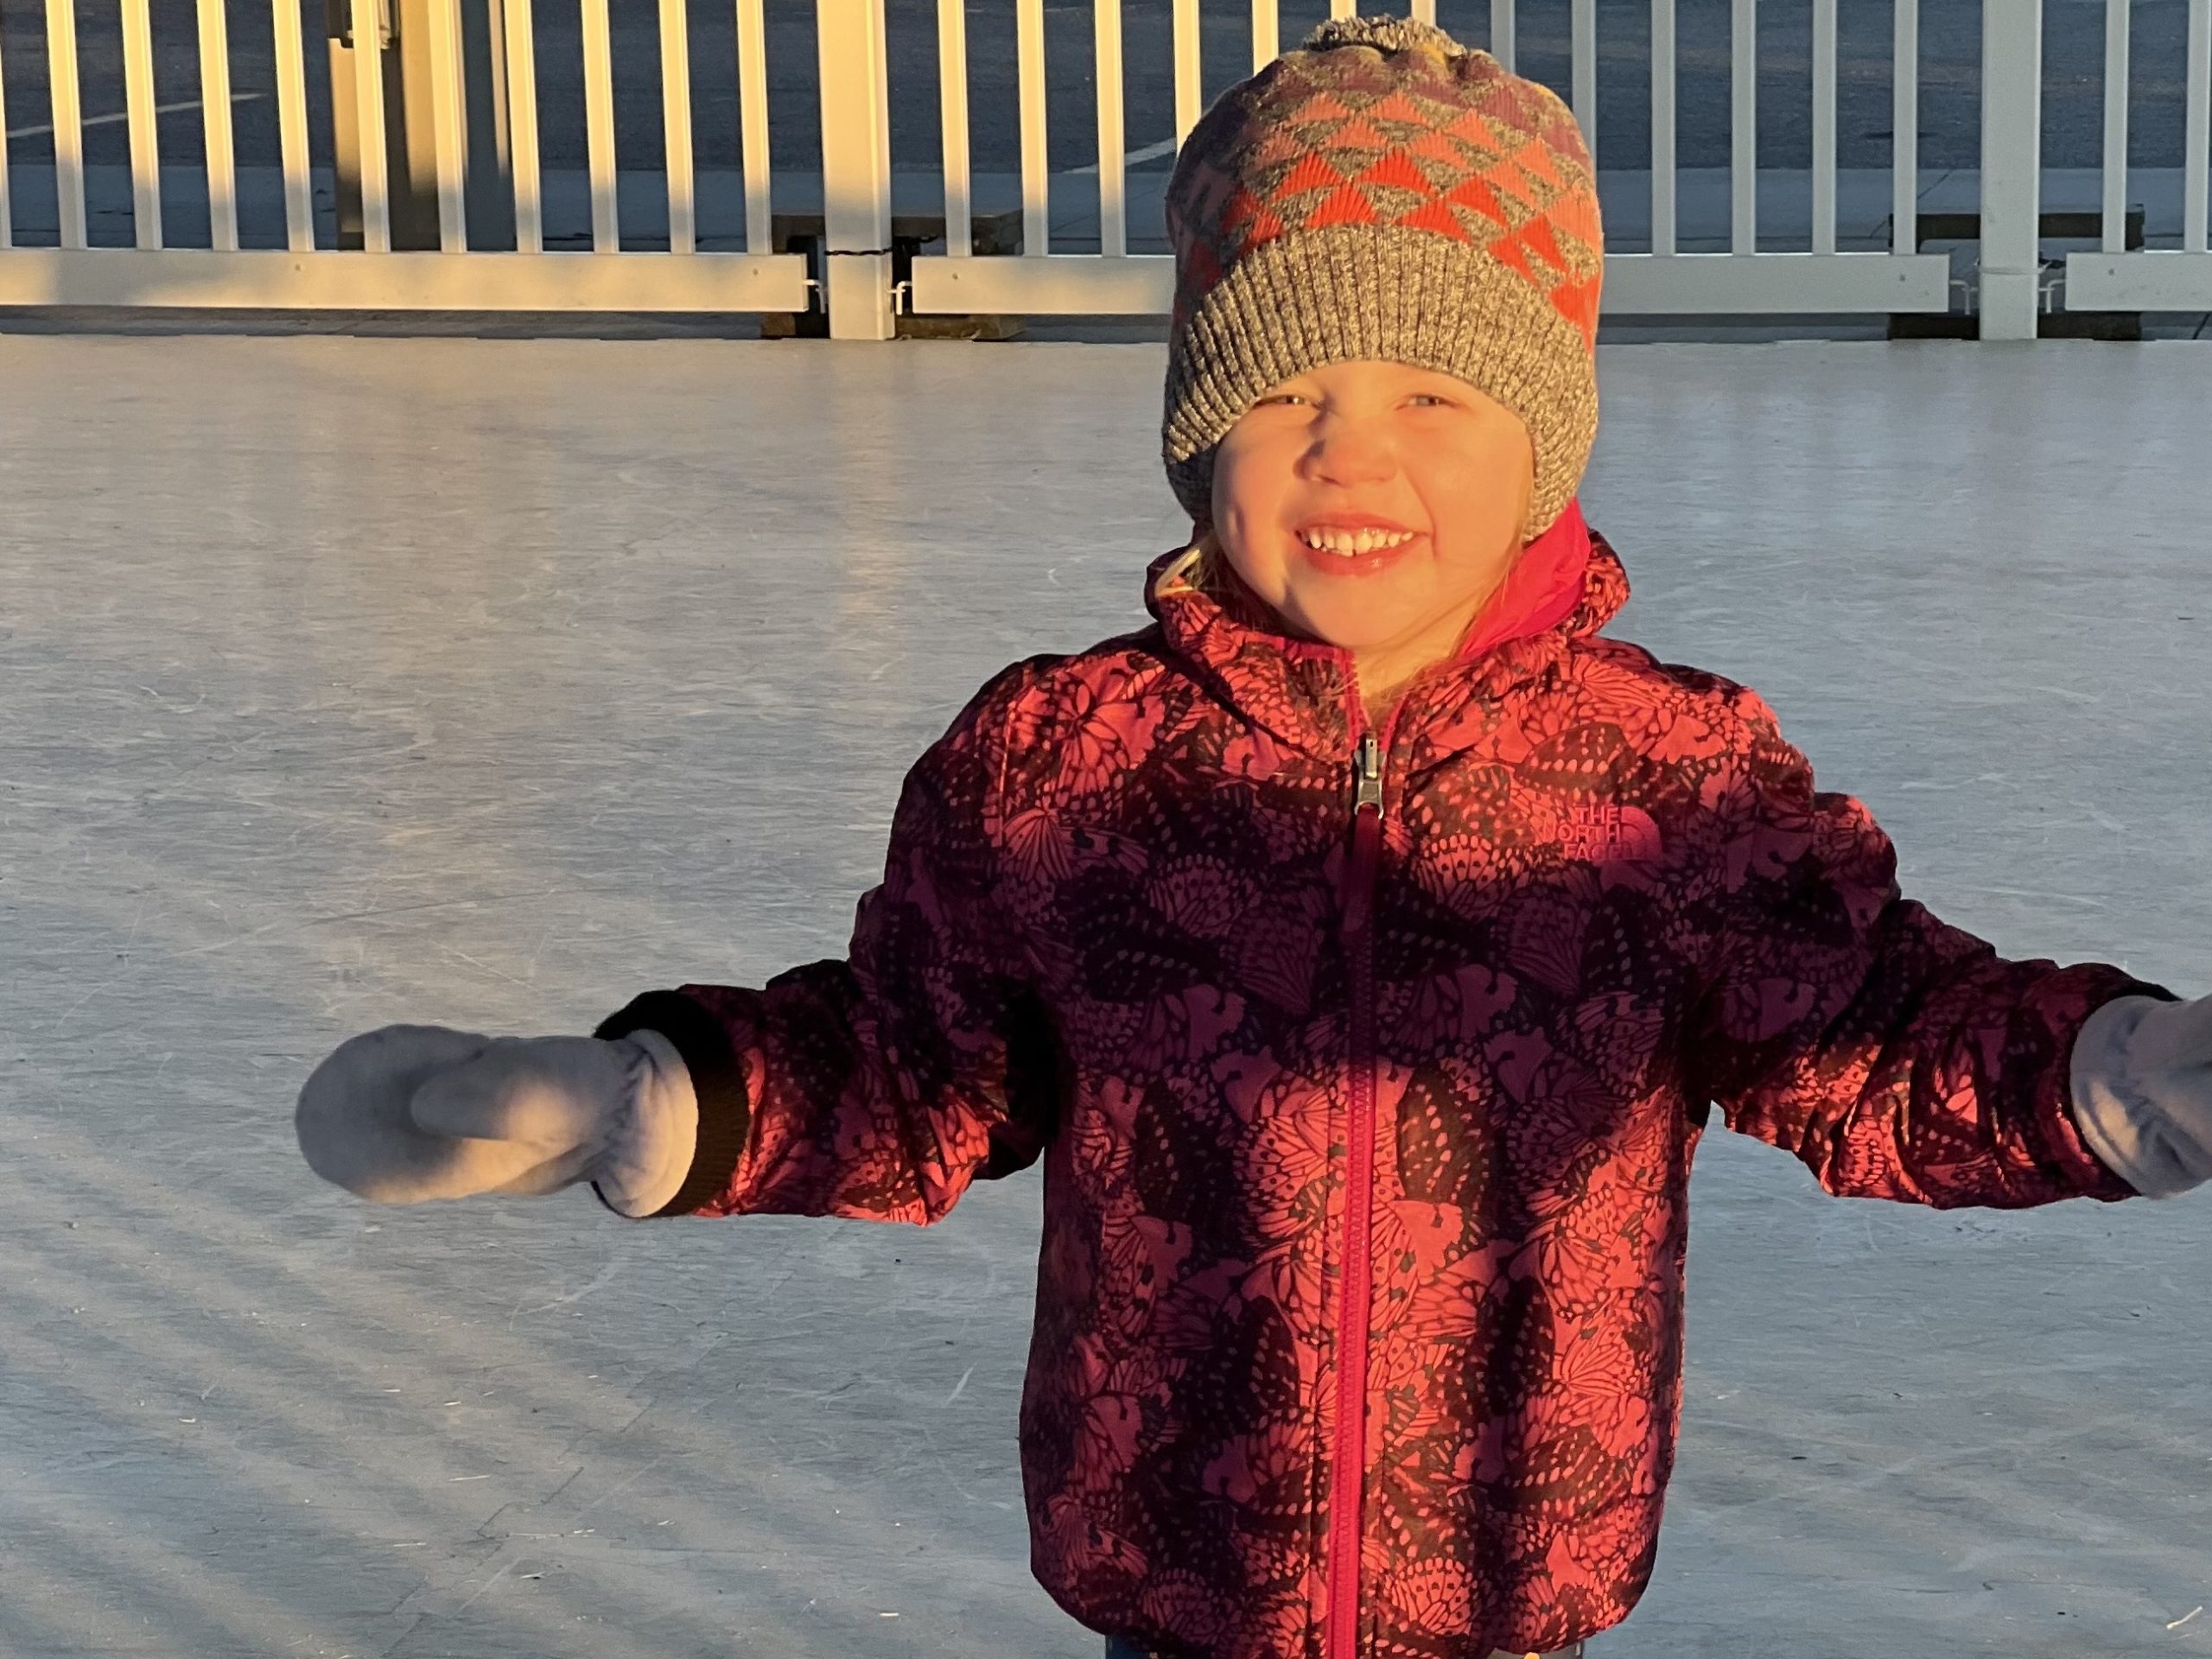 getting outside to ice skate